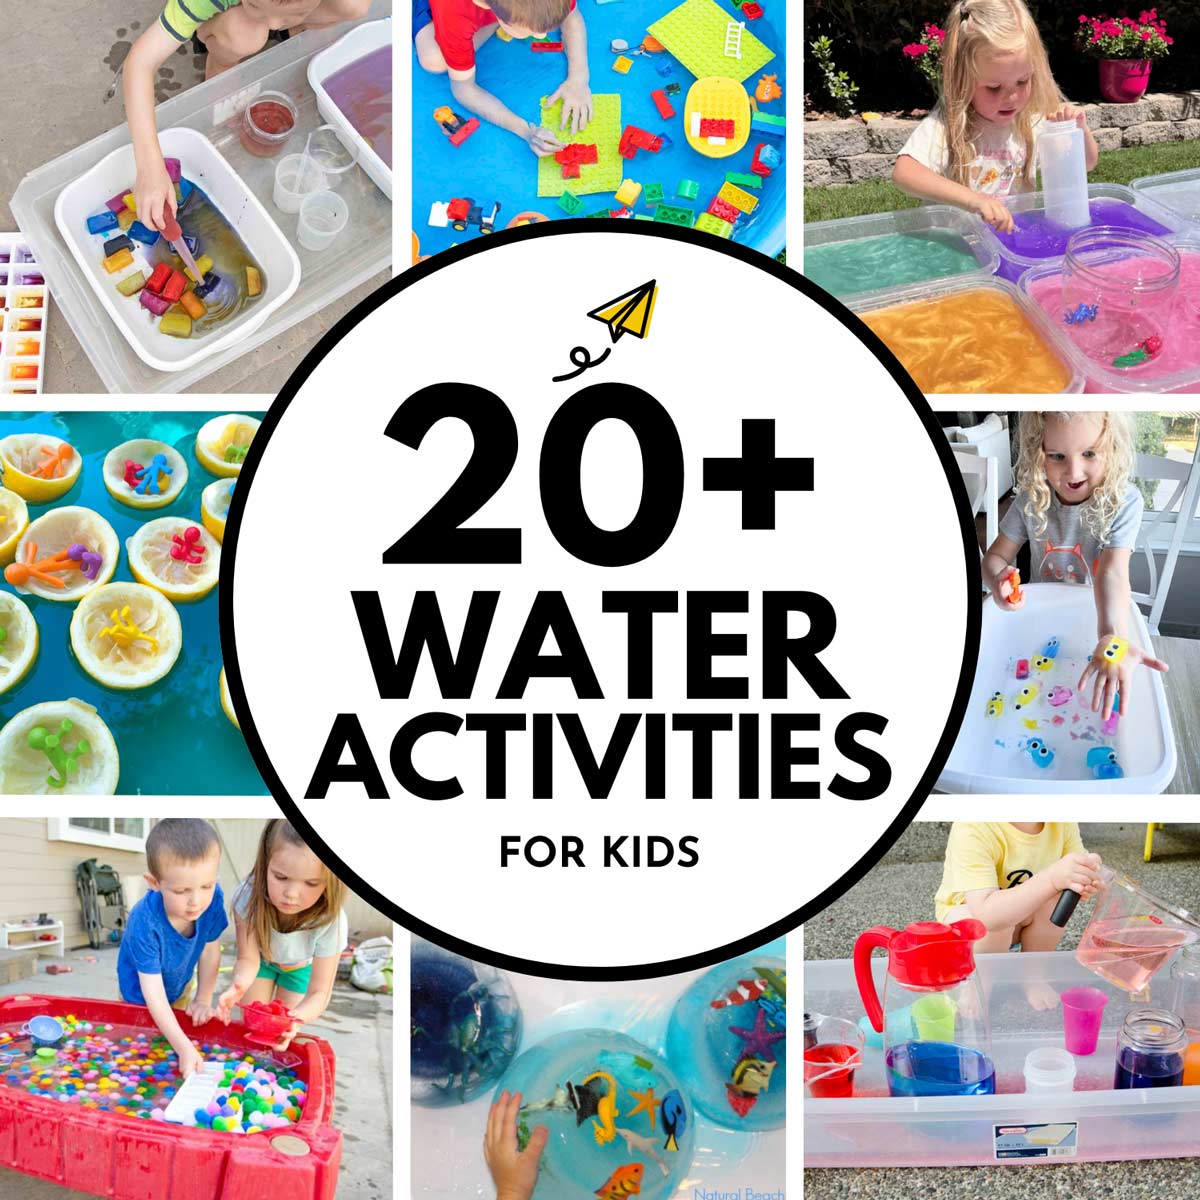 20+ Water Activities for Kids: Image shows 8 water and ice activities